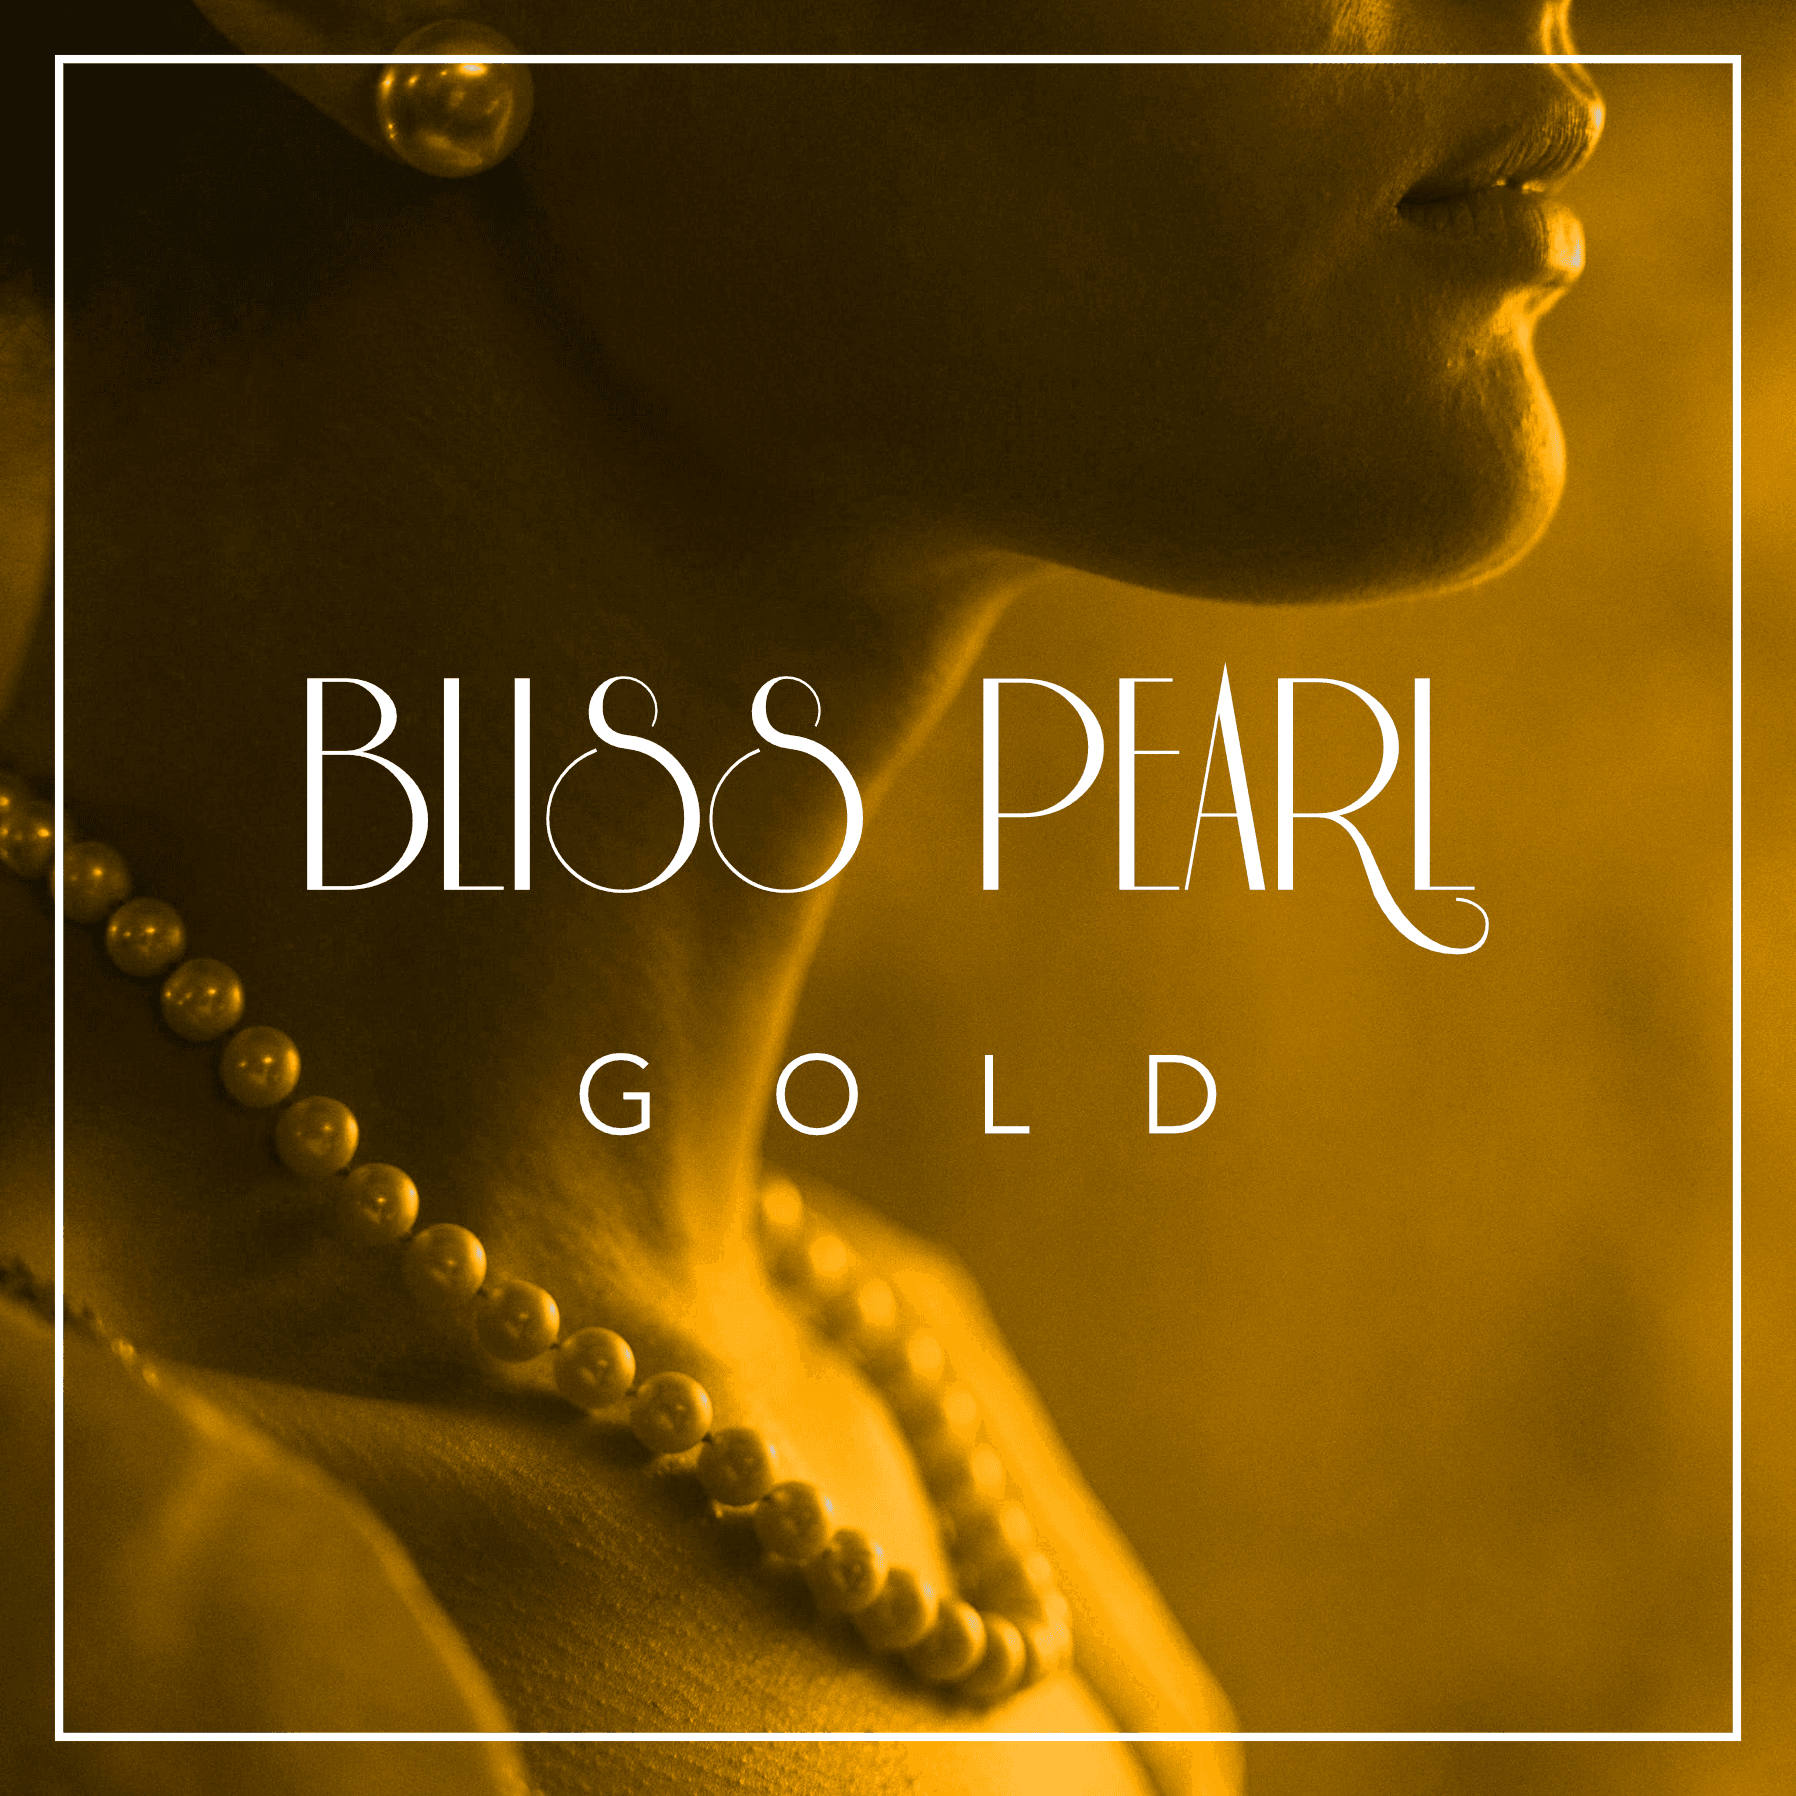 Bliss Pearl Gold